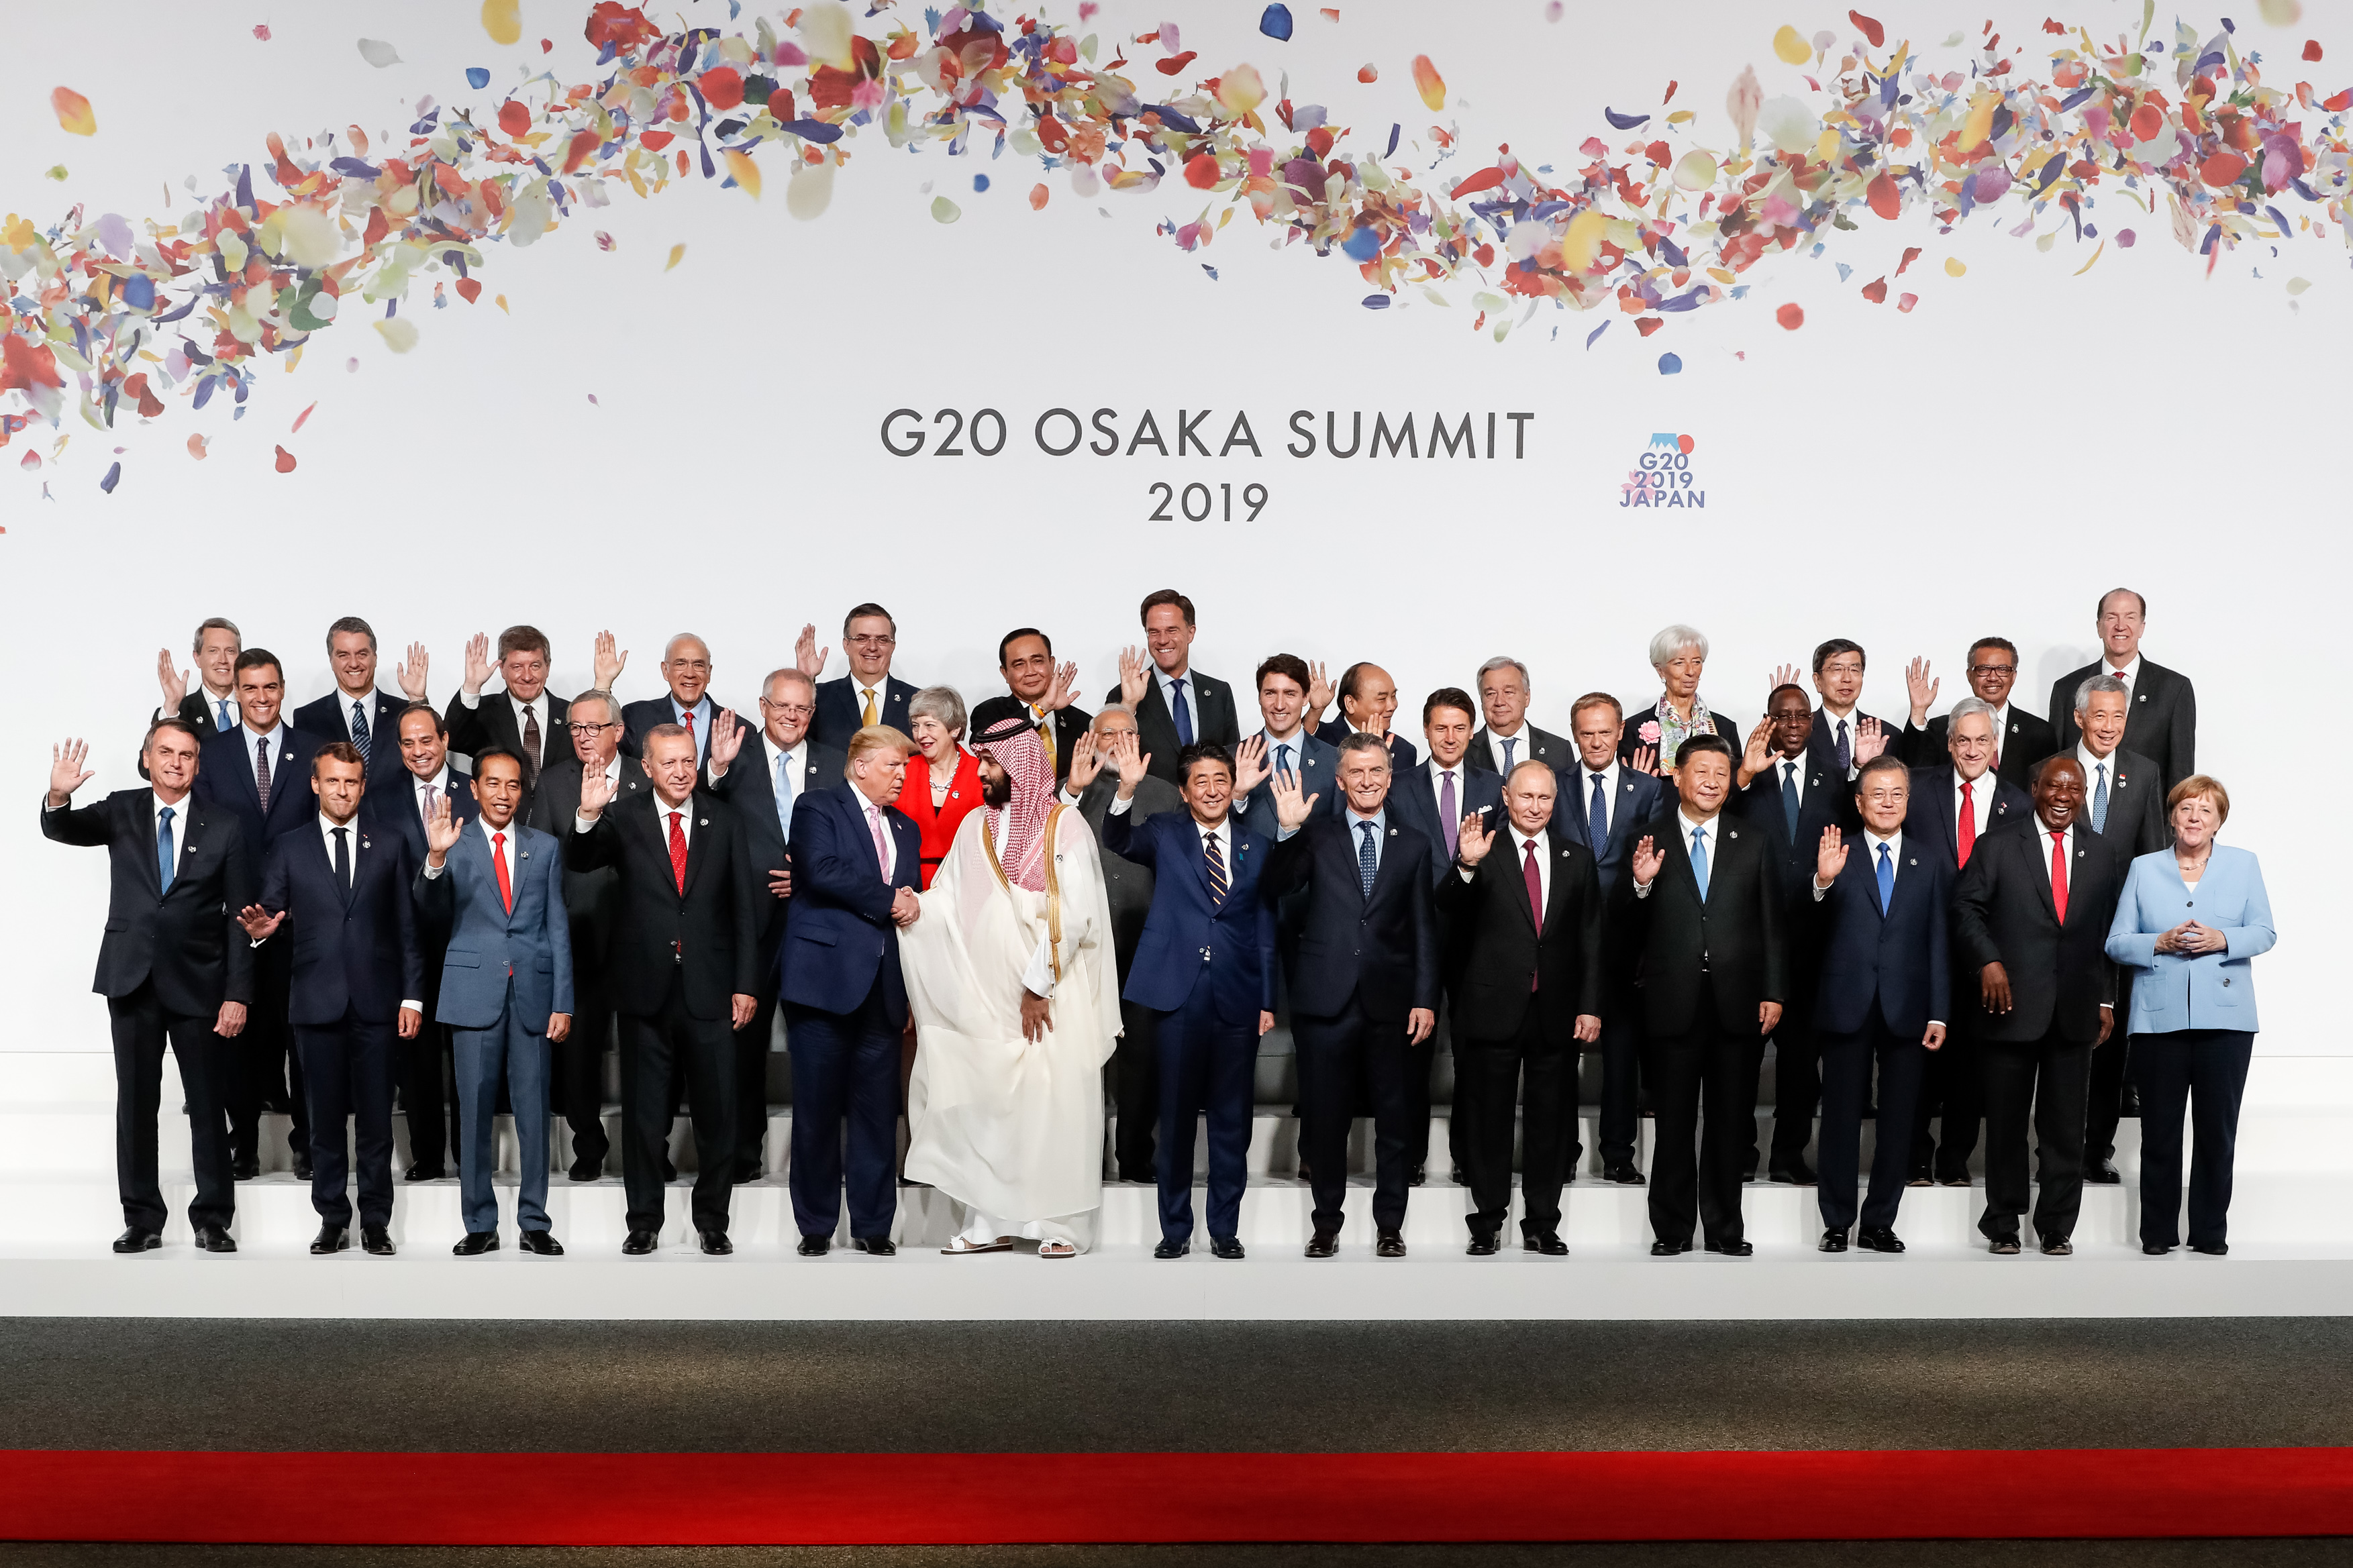   G20 leaders to inject 5 trillion dollars into global economy